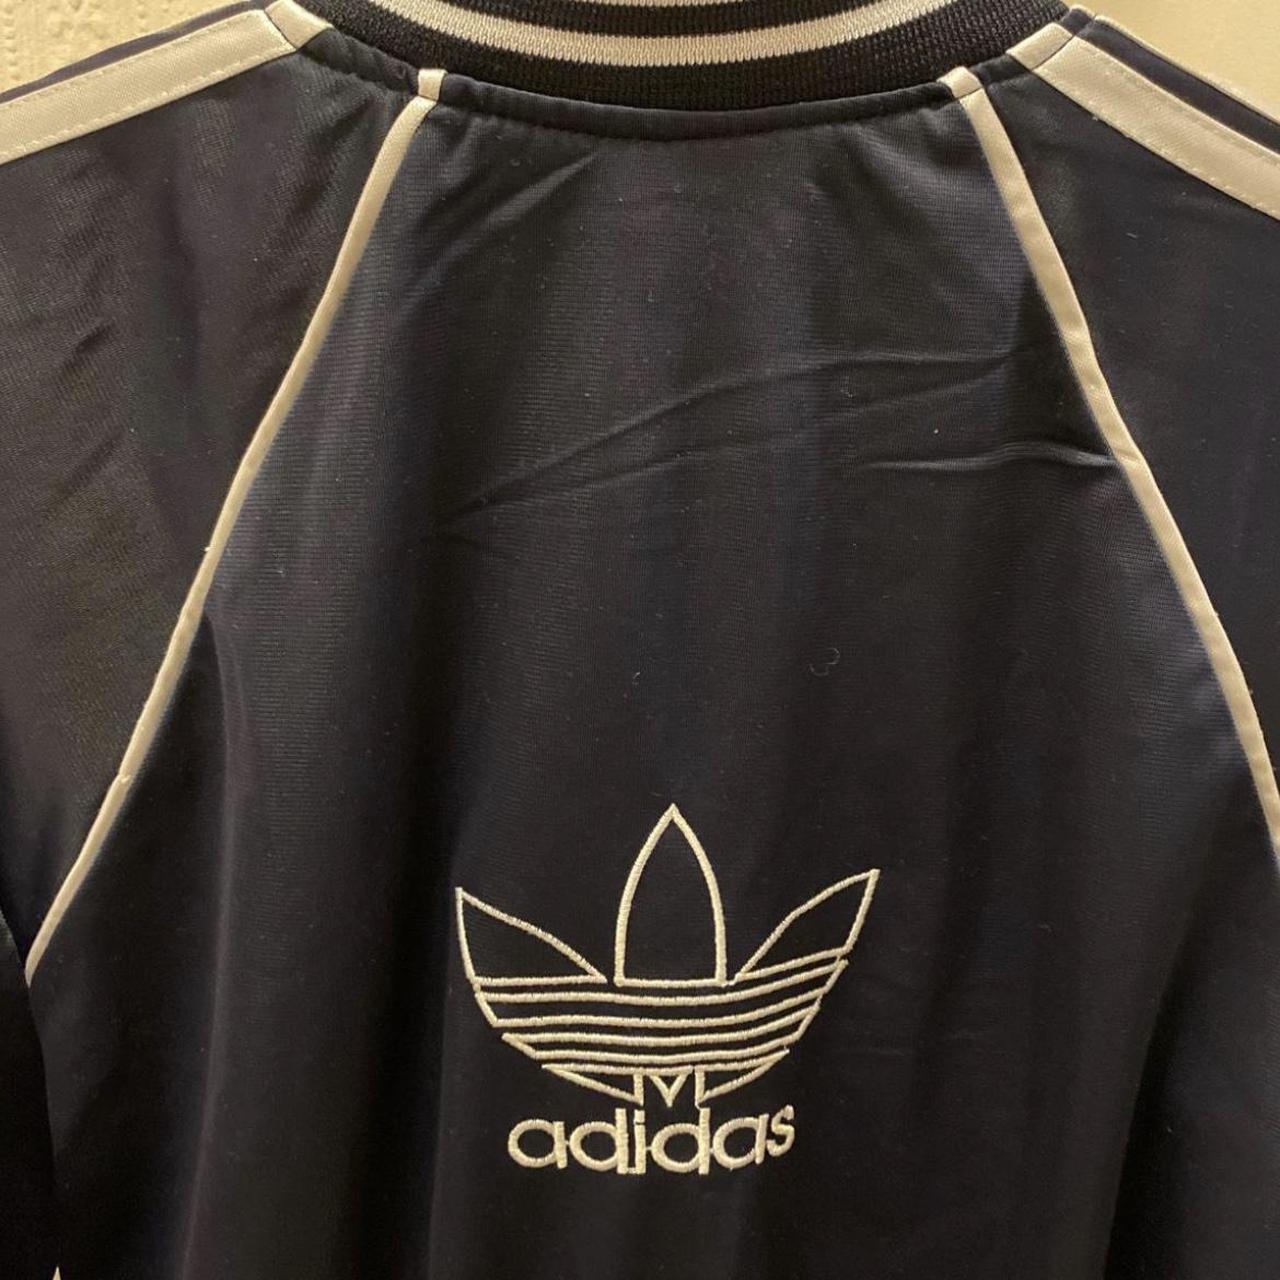 Adidas Vintage track jacket Photos from previous... - Depop